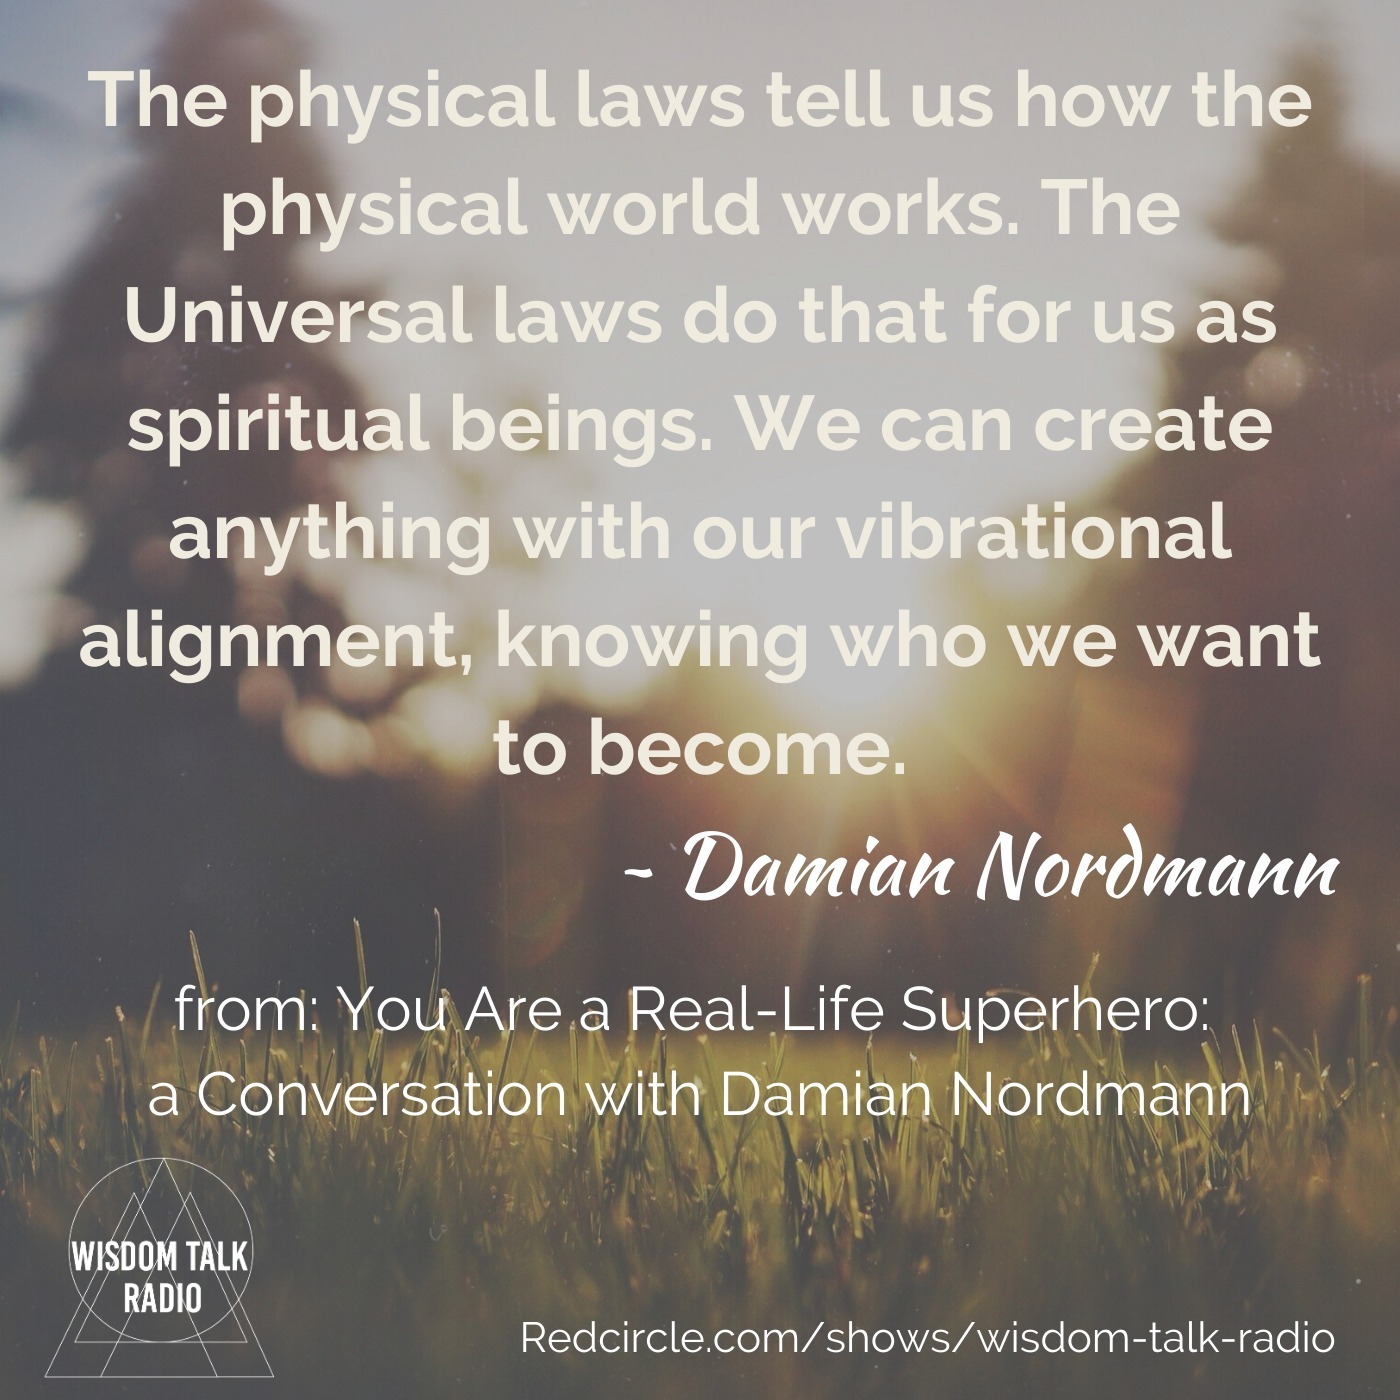 You Are A Real-Life Superhero: a Conversation with Damian Nordmann